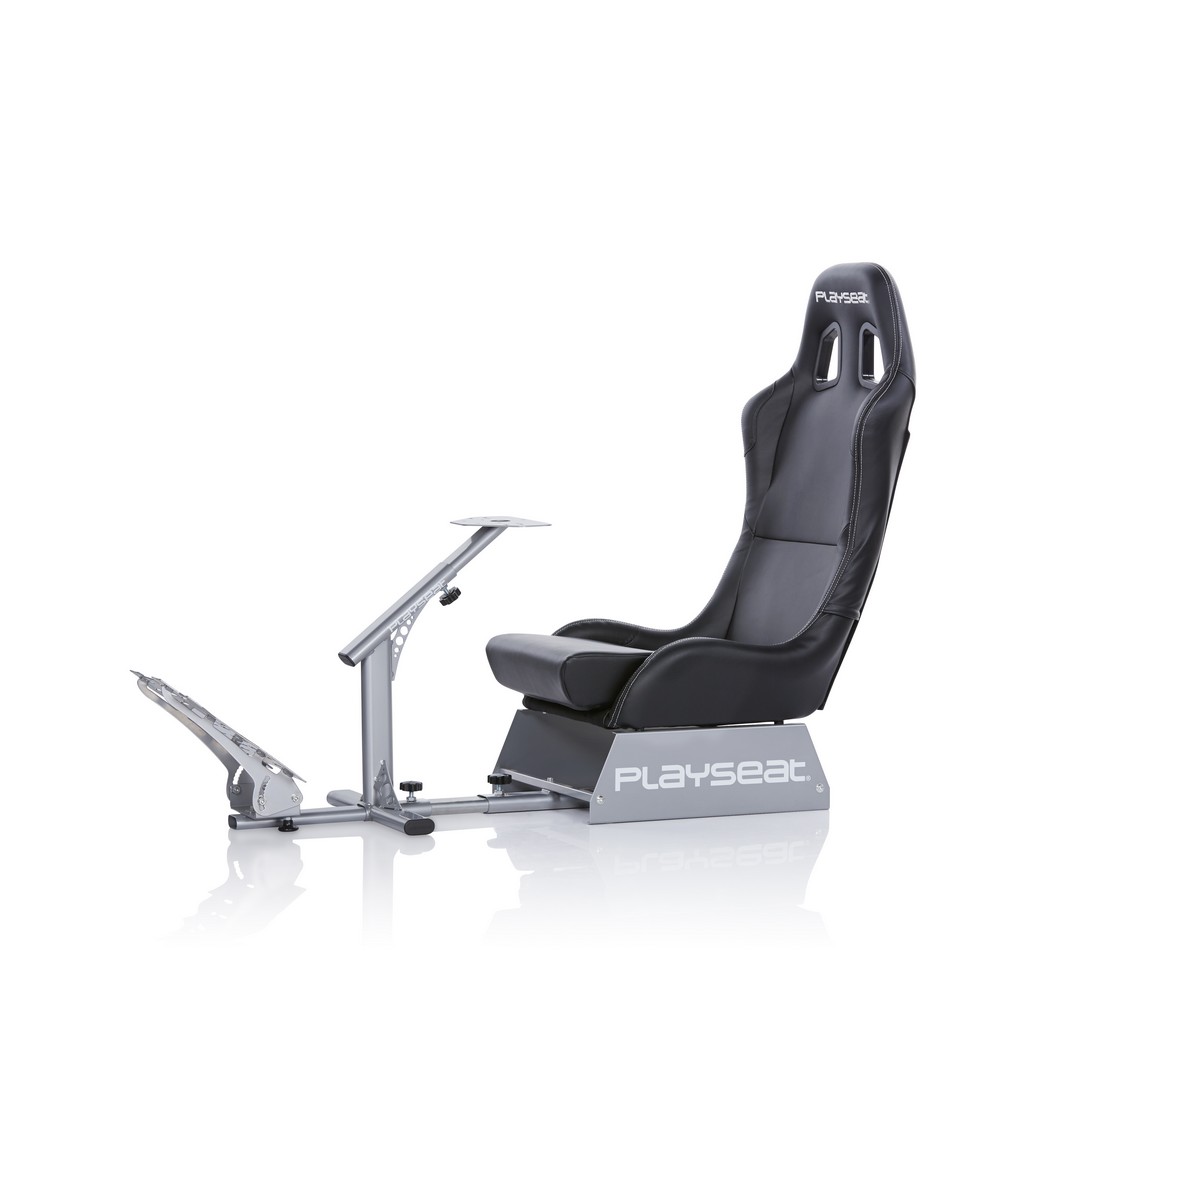 Playseat Evolution specifications